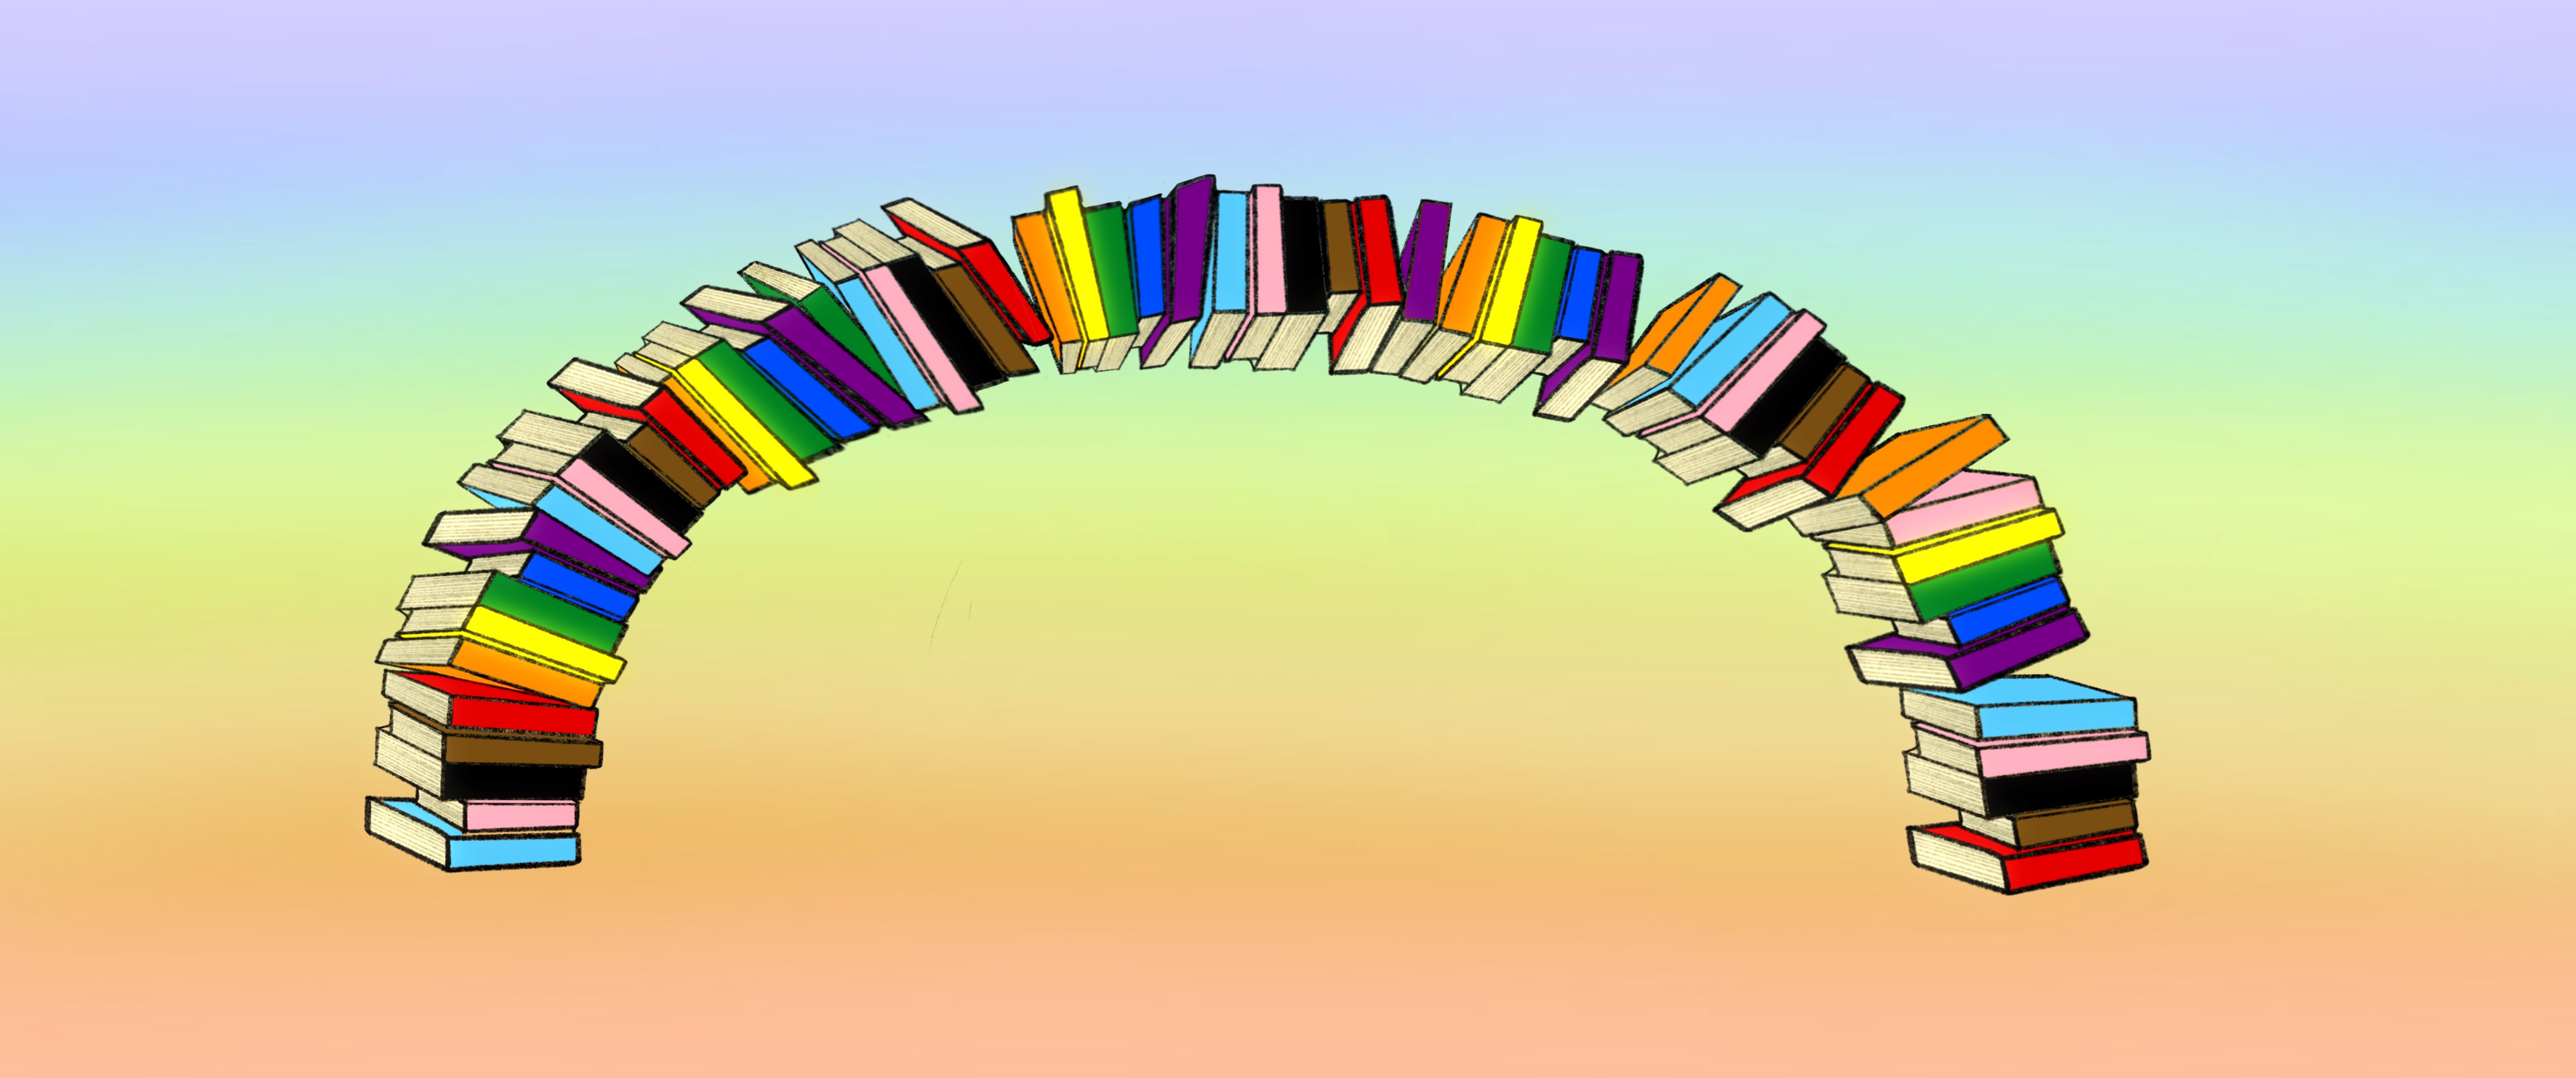 A drawing depicts an archway of books in the colors of the Progress Pride Flag. The background is a classic rainbow gradient pattern.